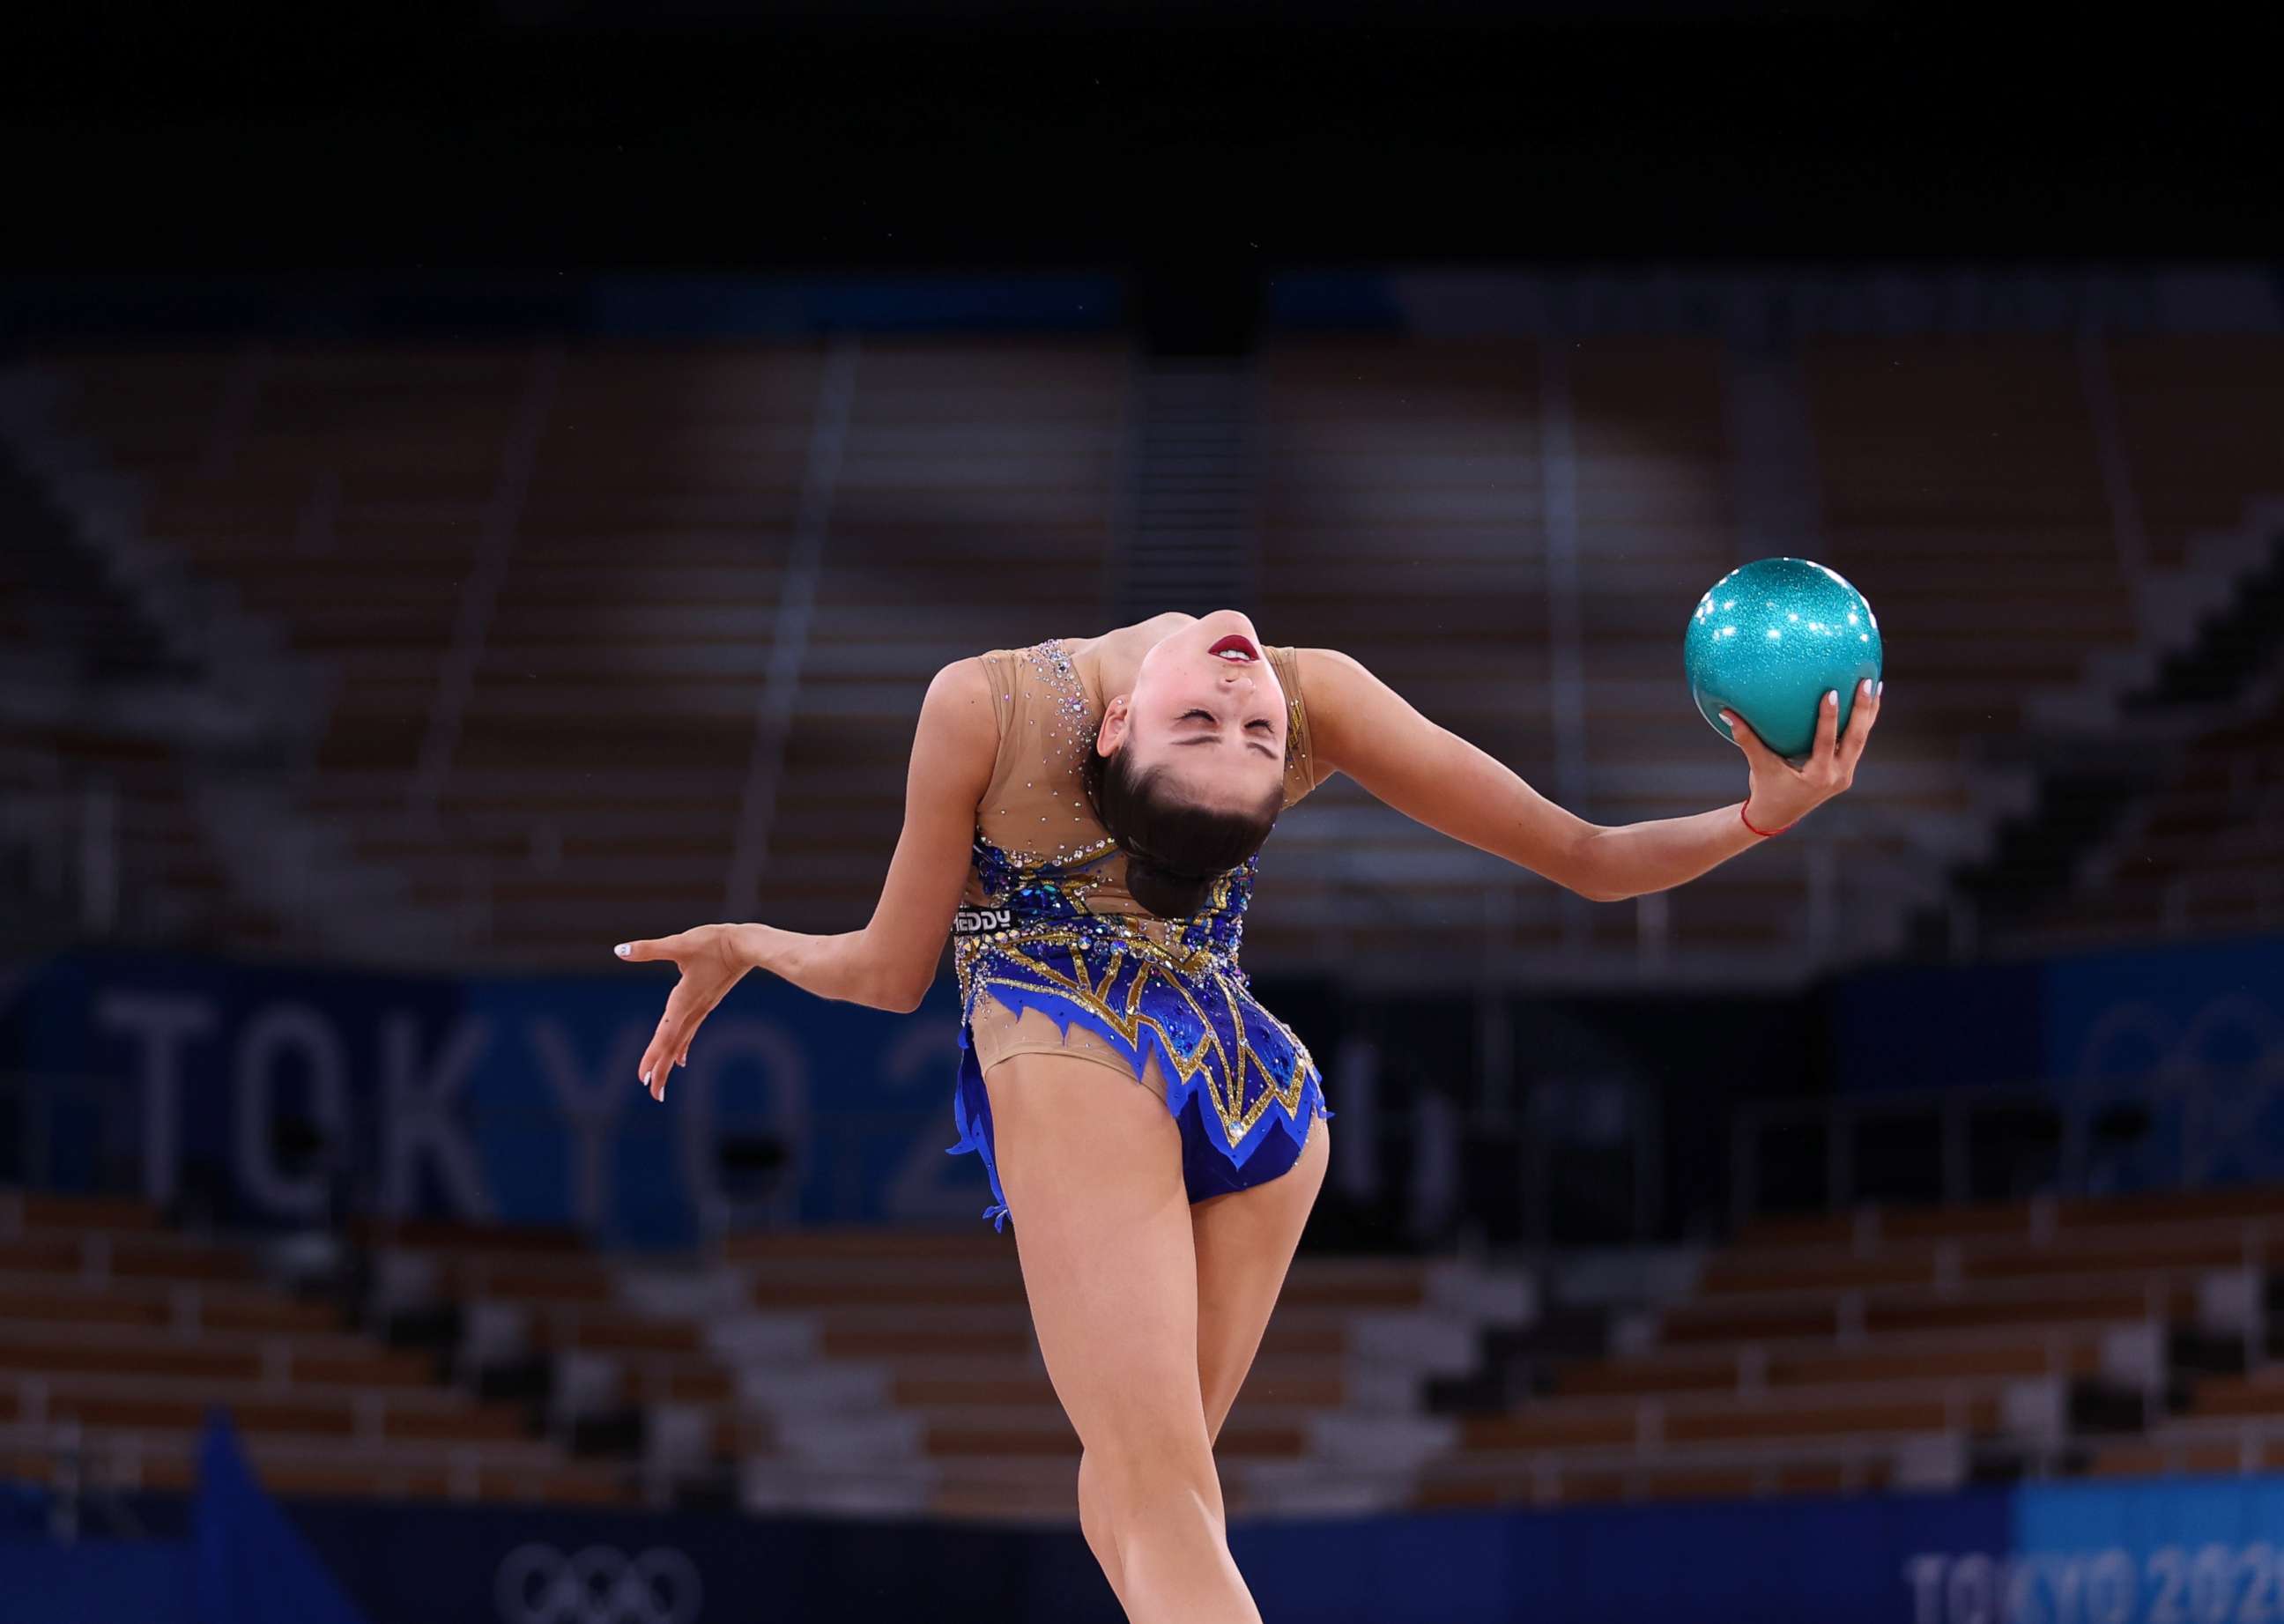 PHOTO: Milena Baldassarri of Italy is seen in action in the rhythmic gymnastics individual all-around qualification round on Aug. 6, 2021, in Tokyo, Japan.